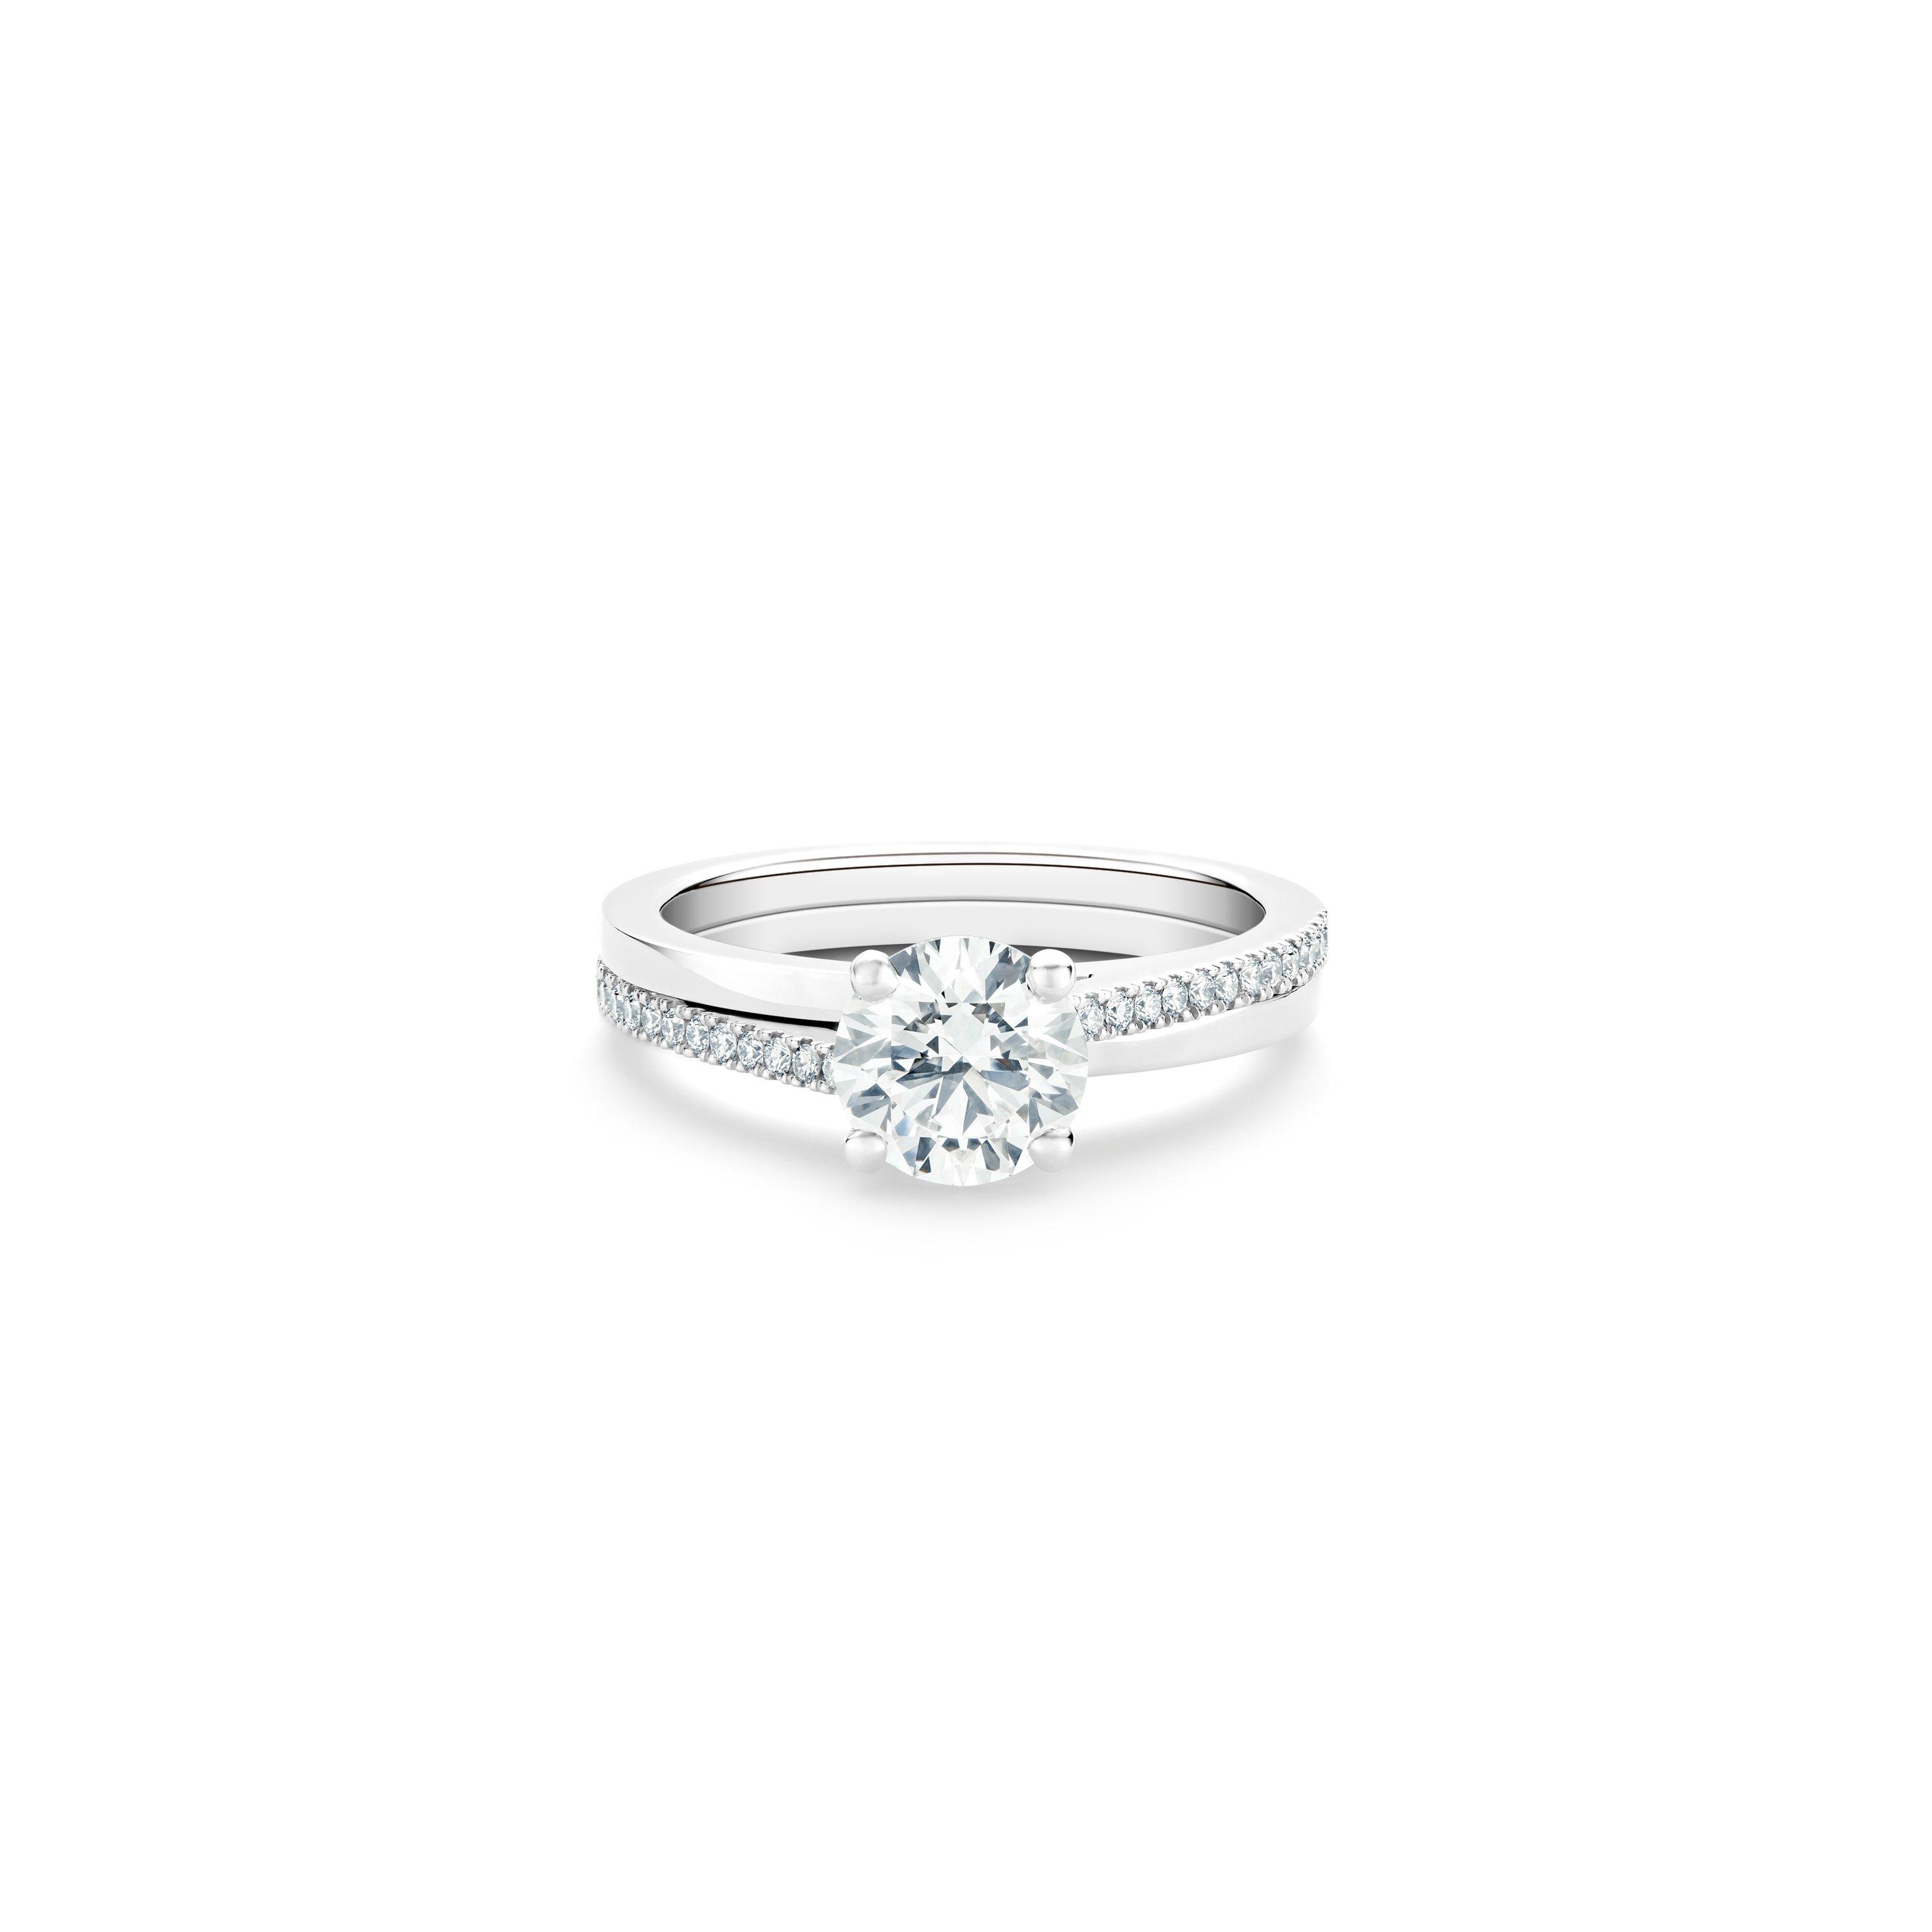 De Beers 0.68 tcw Forever Pave Round Brilliant Diamond Engagement Ring